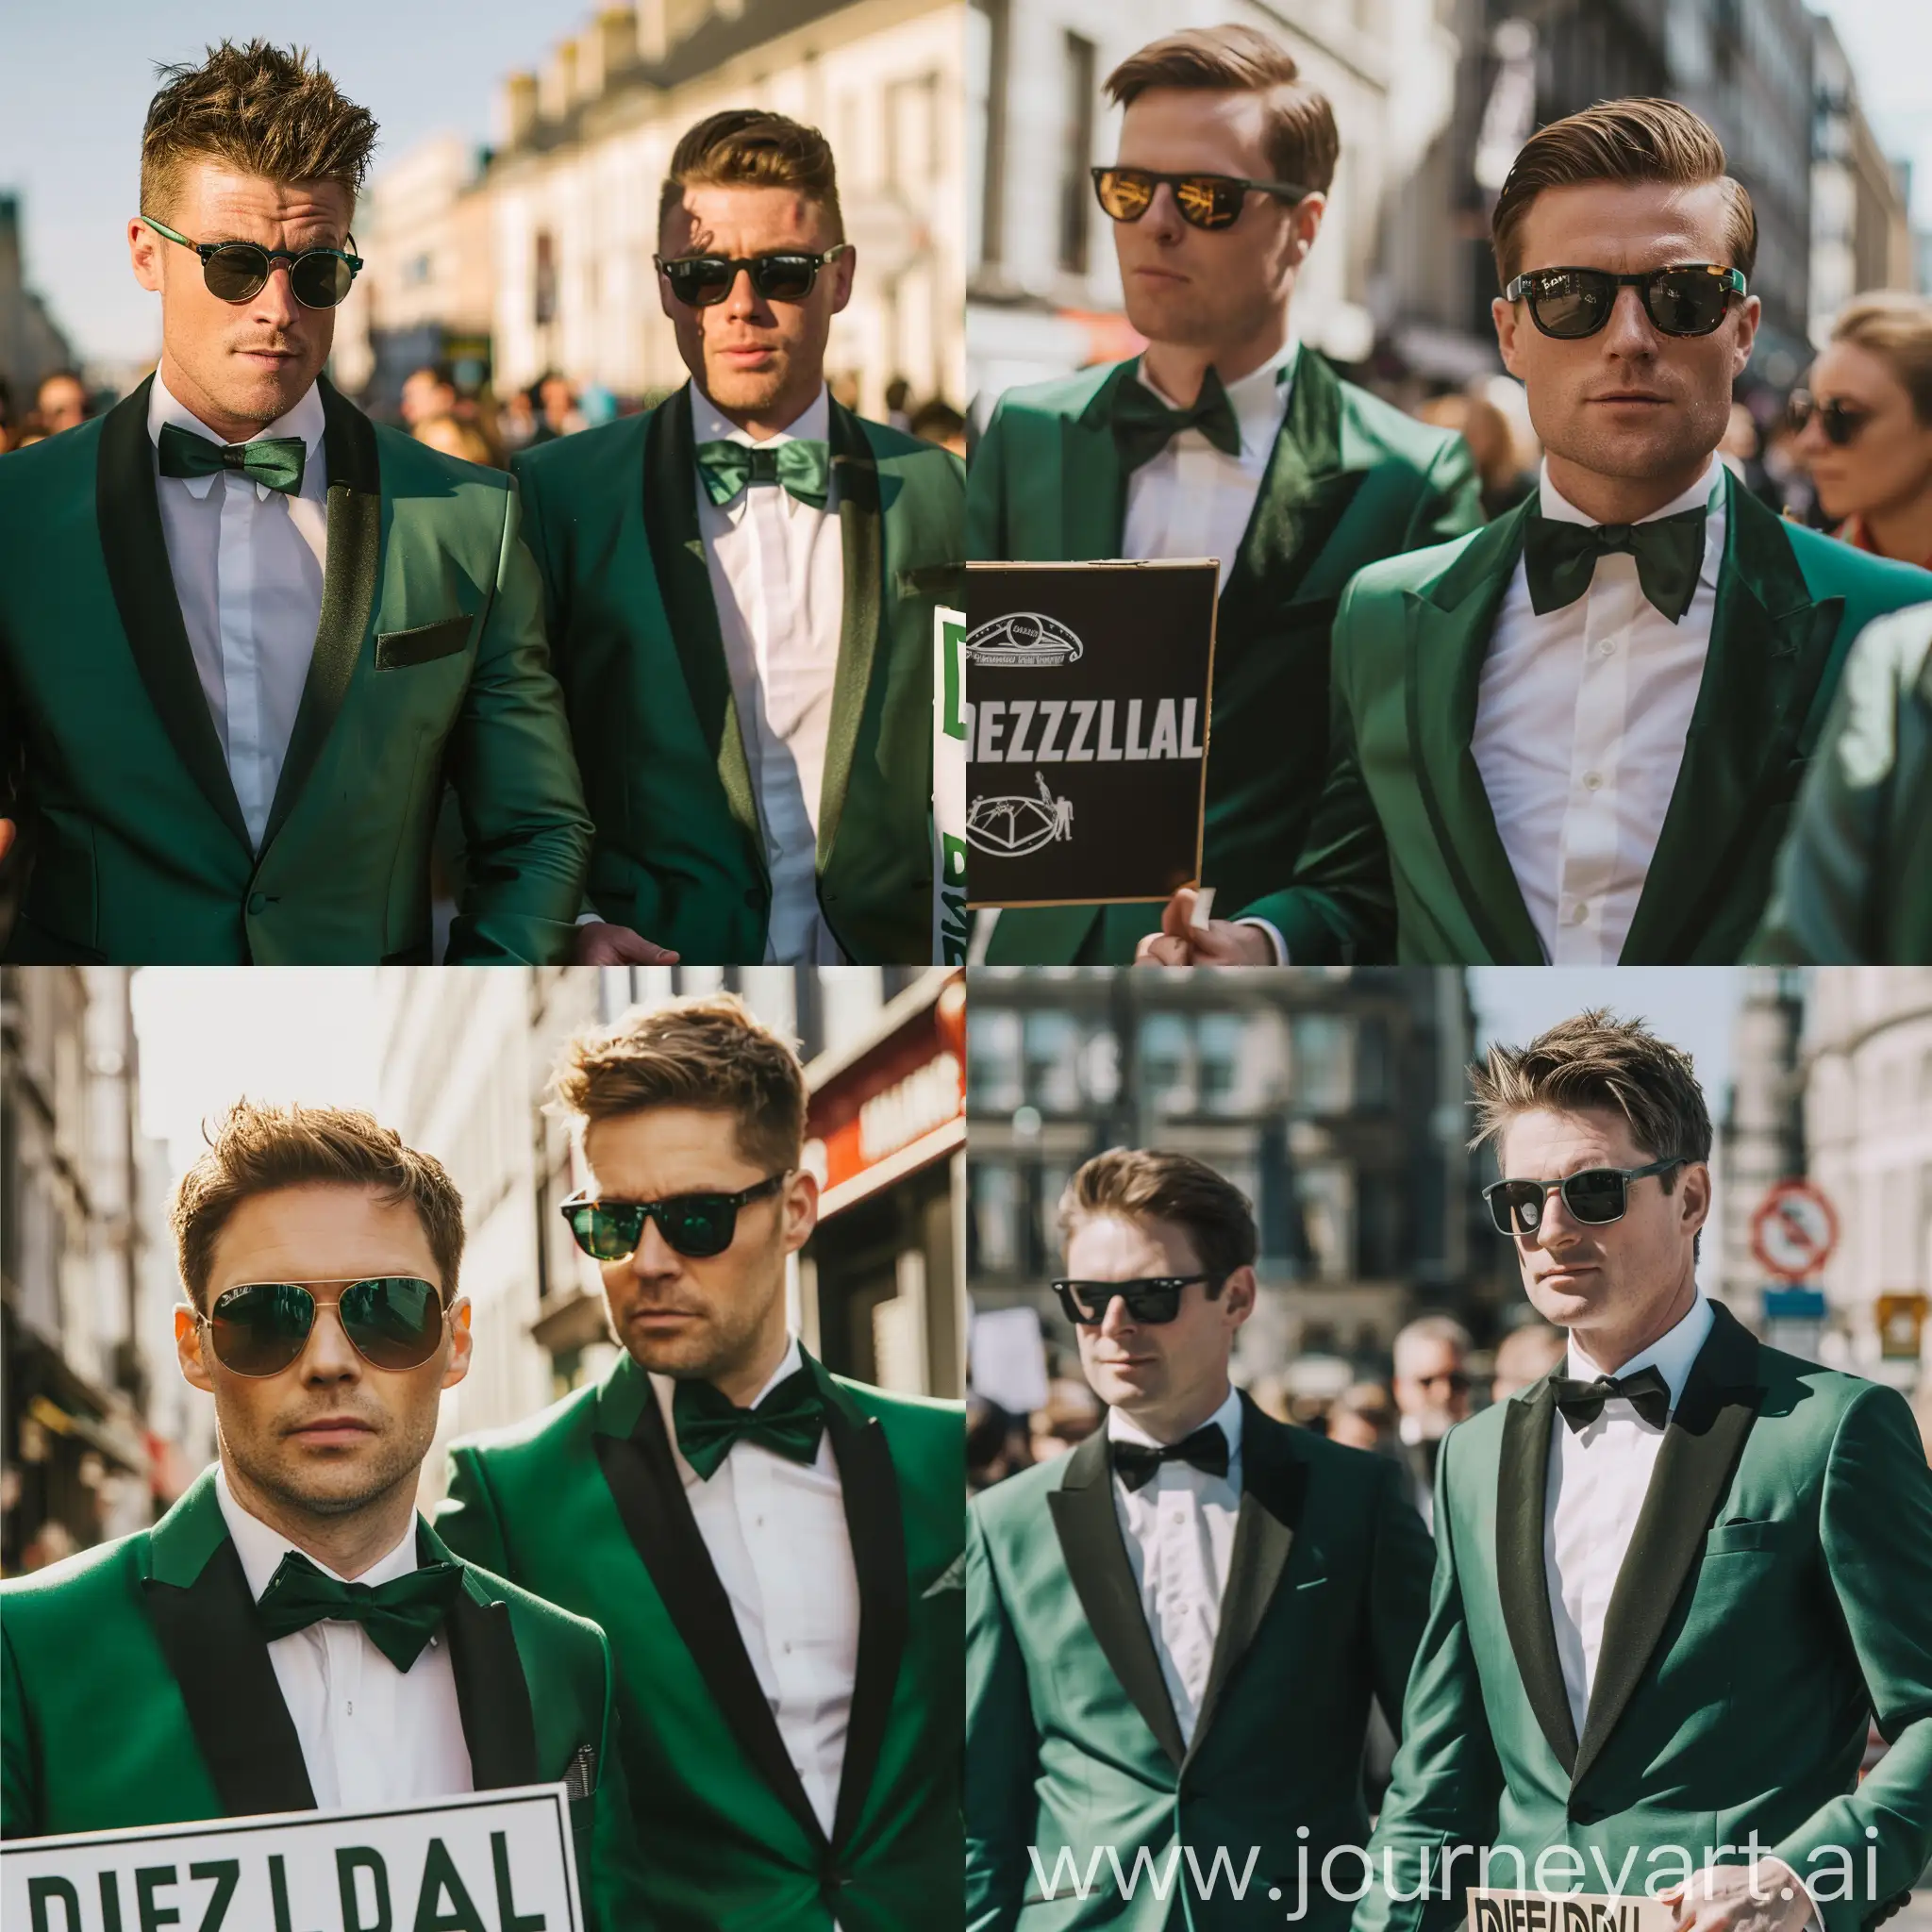 Stylish-Men-in-Green-Tuxedos-Exploring-Dublin-City-with-Diezeldal-Sign